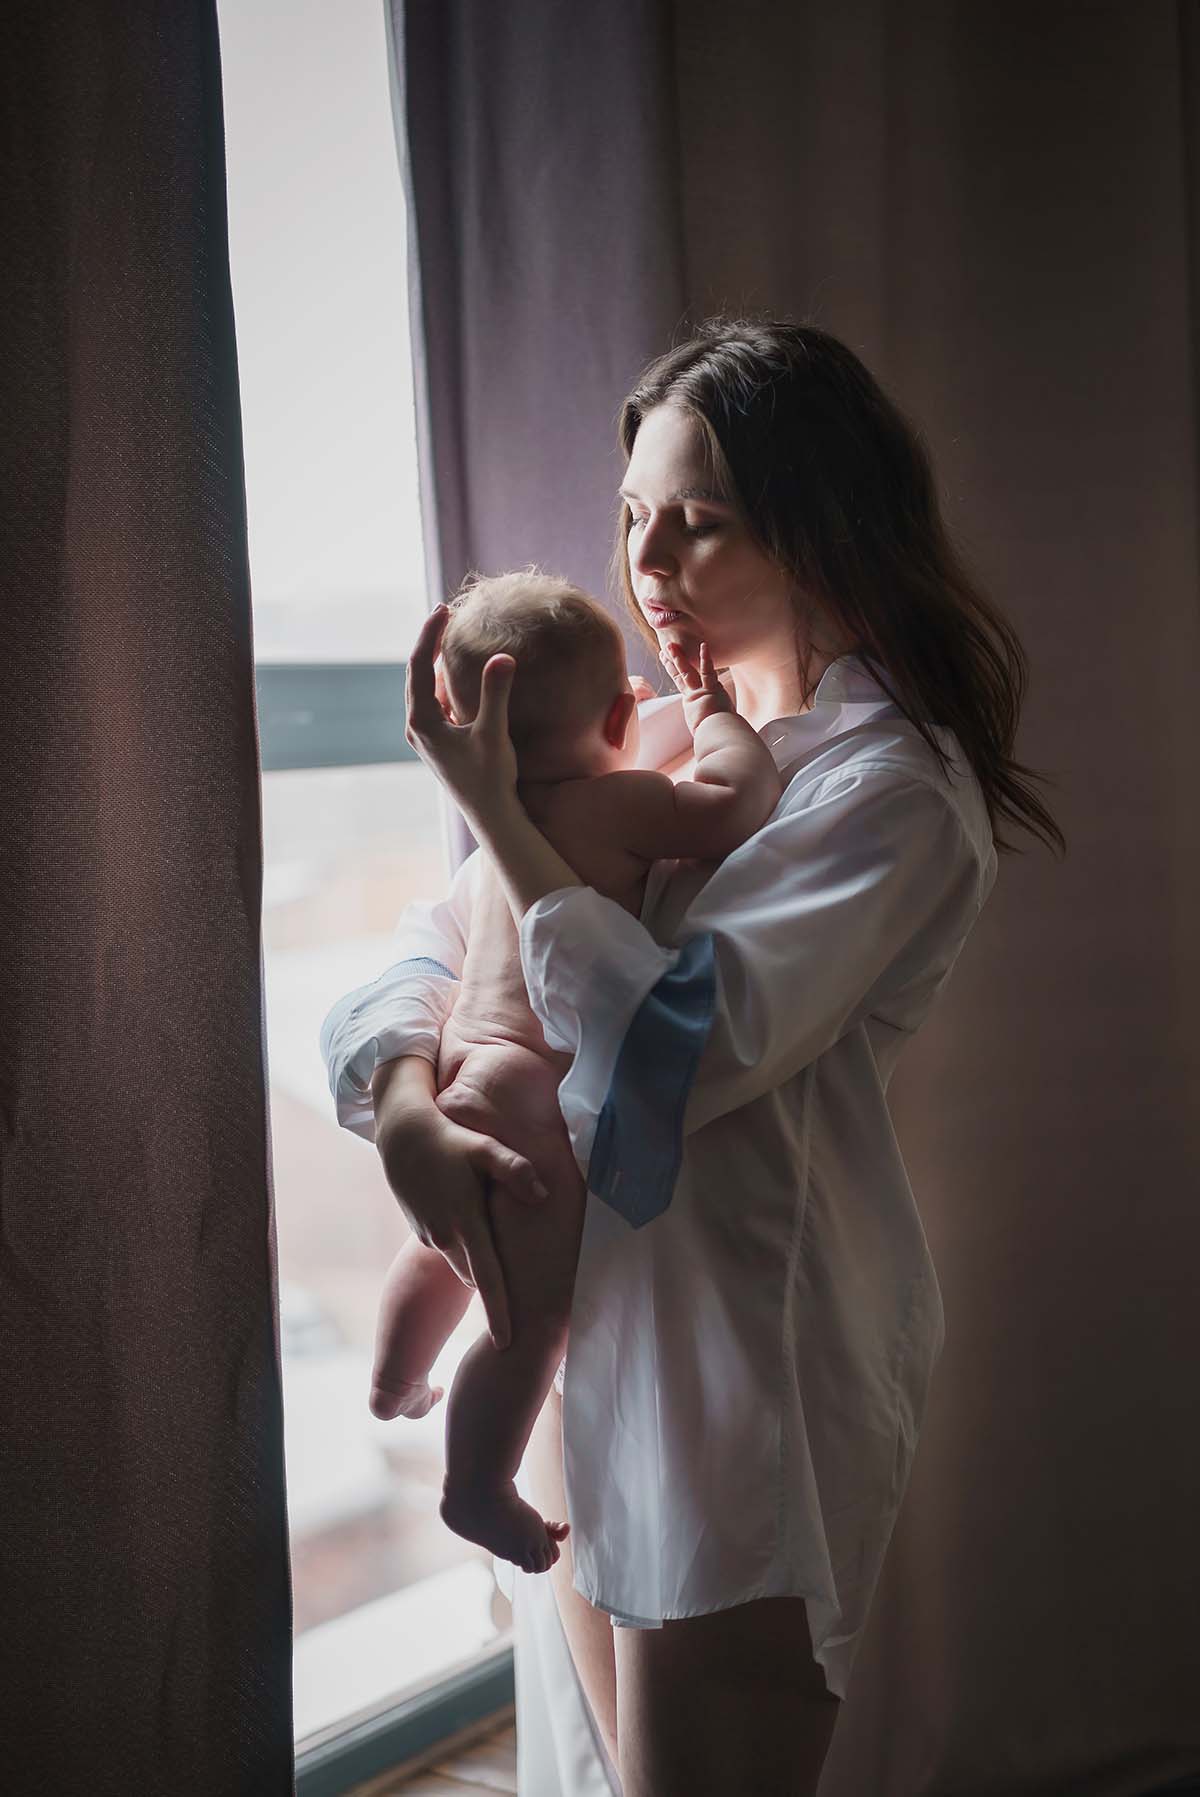 There is life after post natal depression, and as difficult as it is to imagine right now, you can reclaim your power. It's not easy, but it can be done.